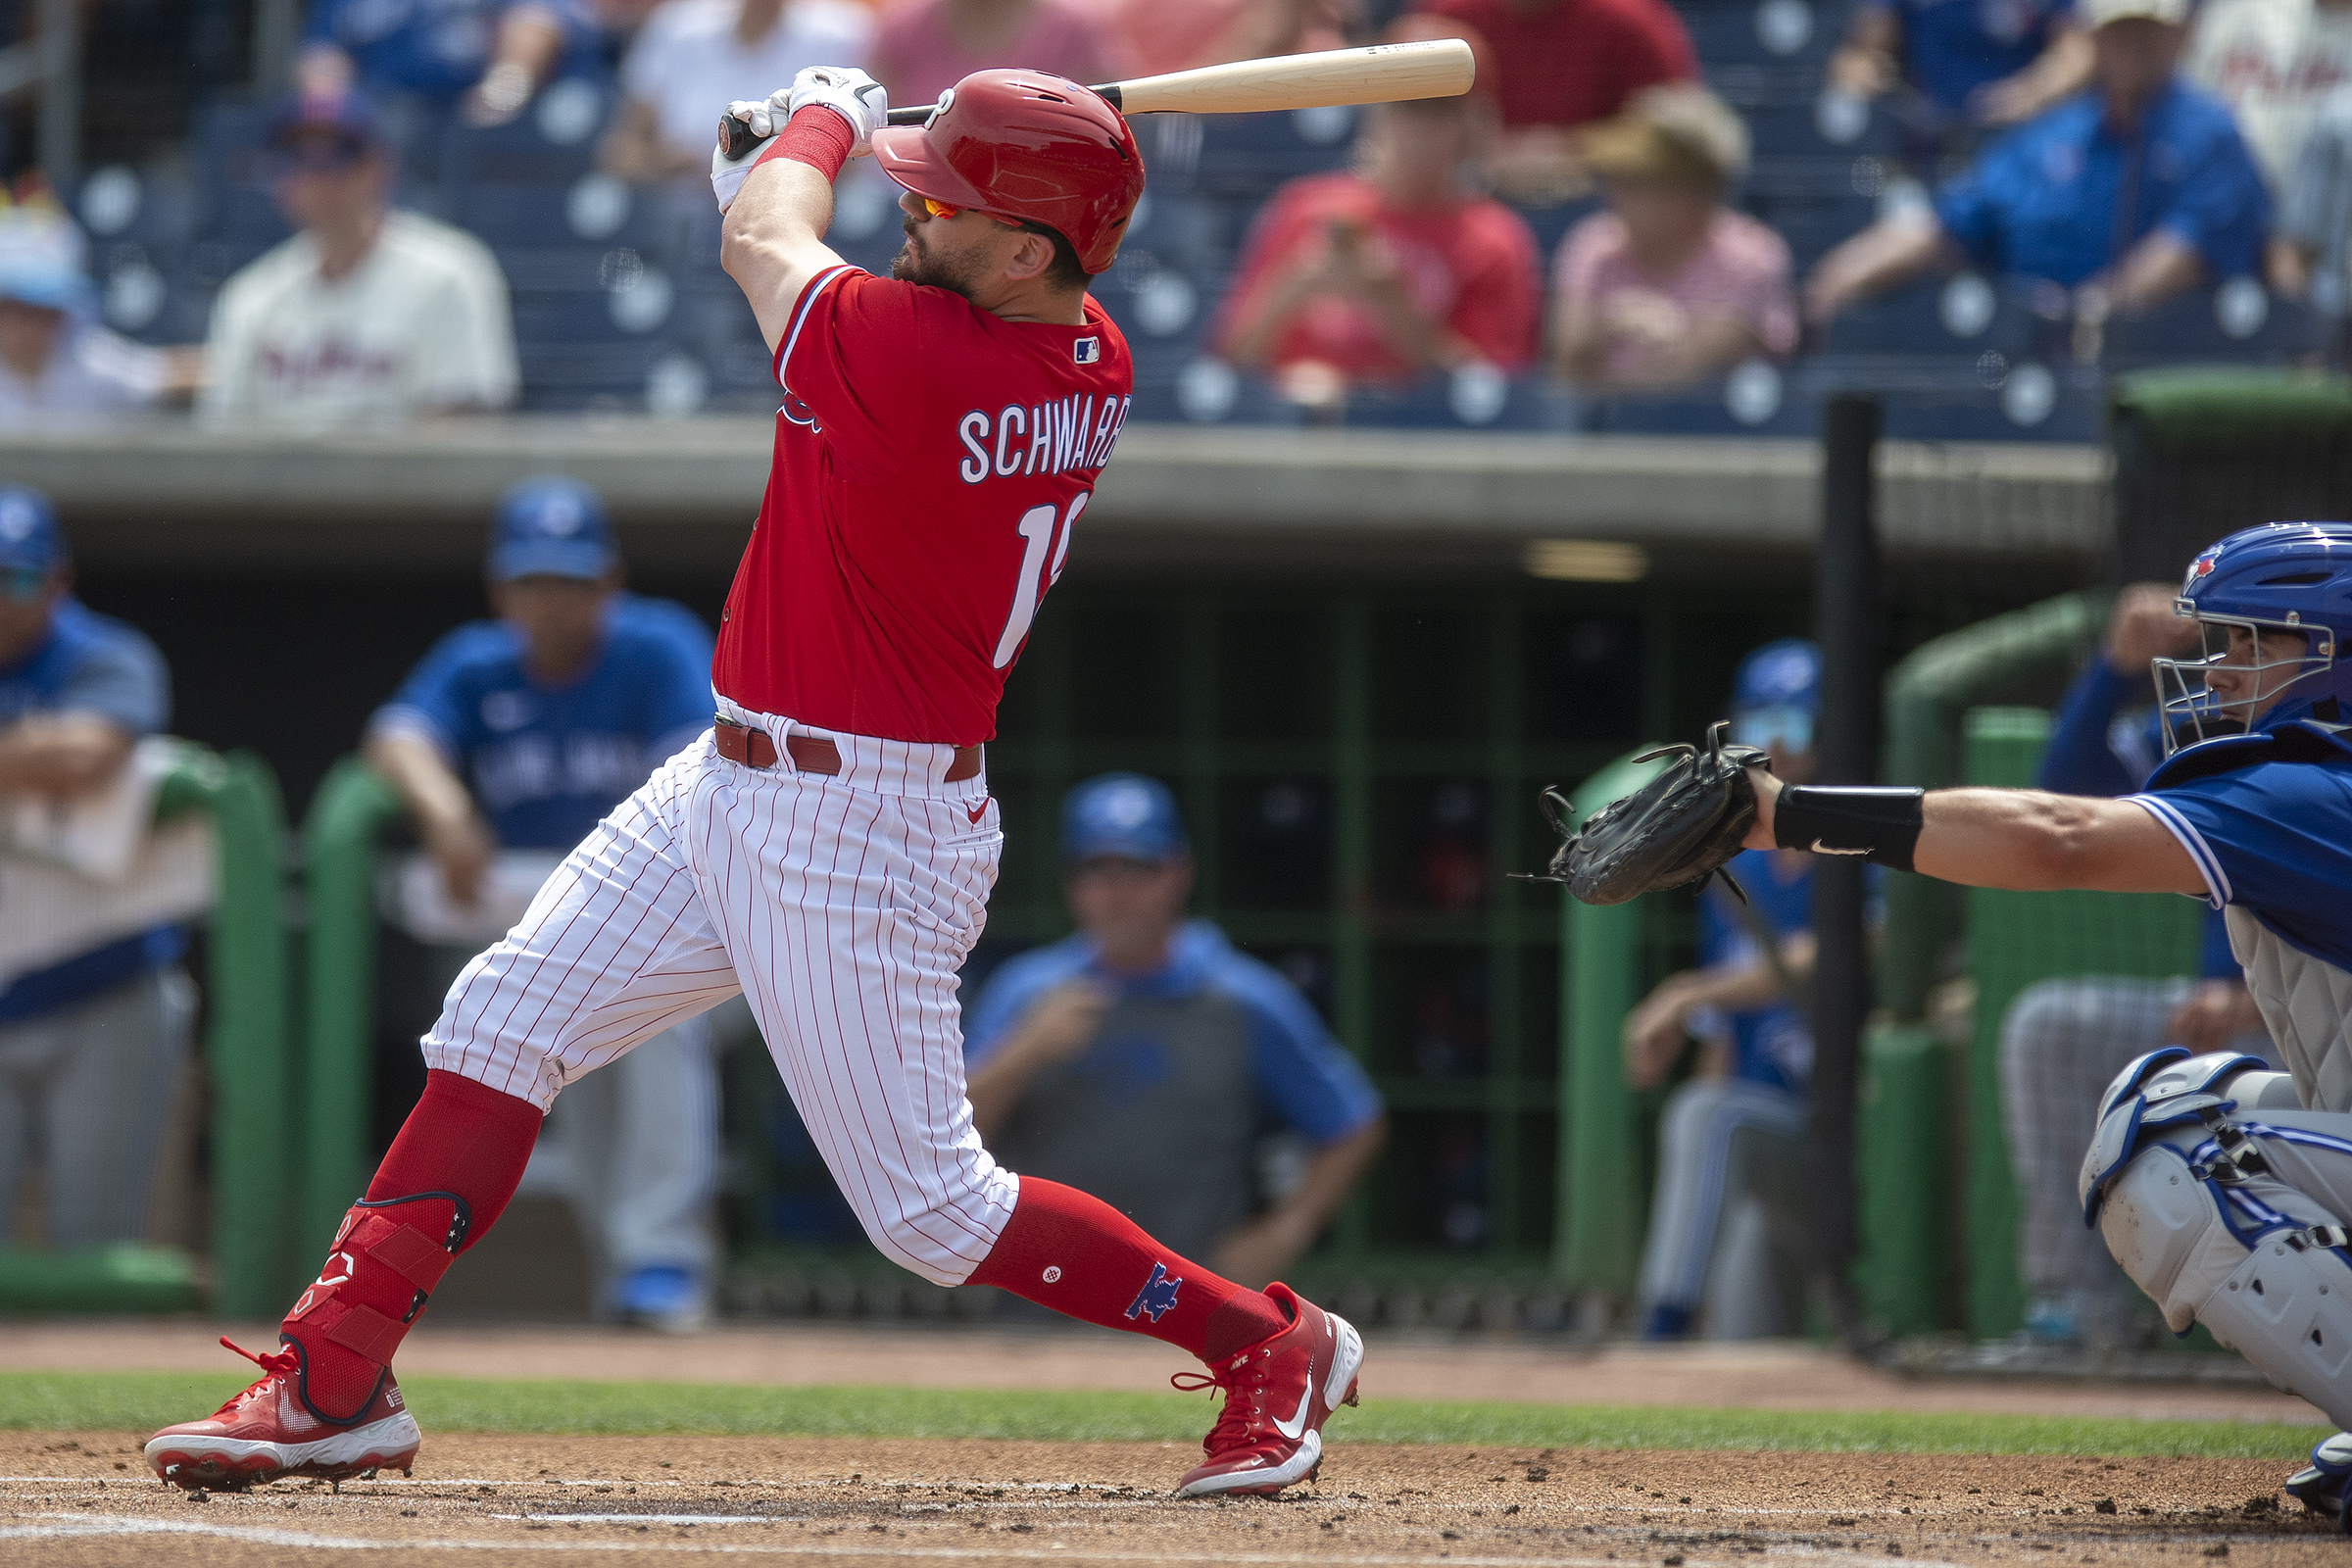 Kyle Schwarber makes Phillies debut as DH in leadoff spot in 8-7